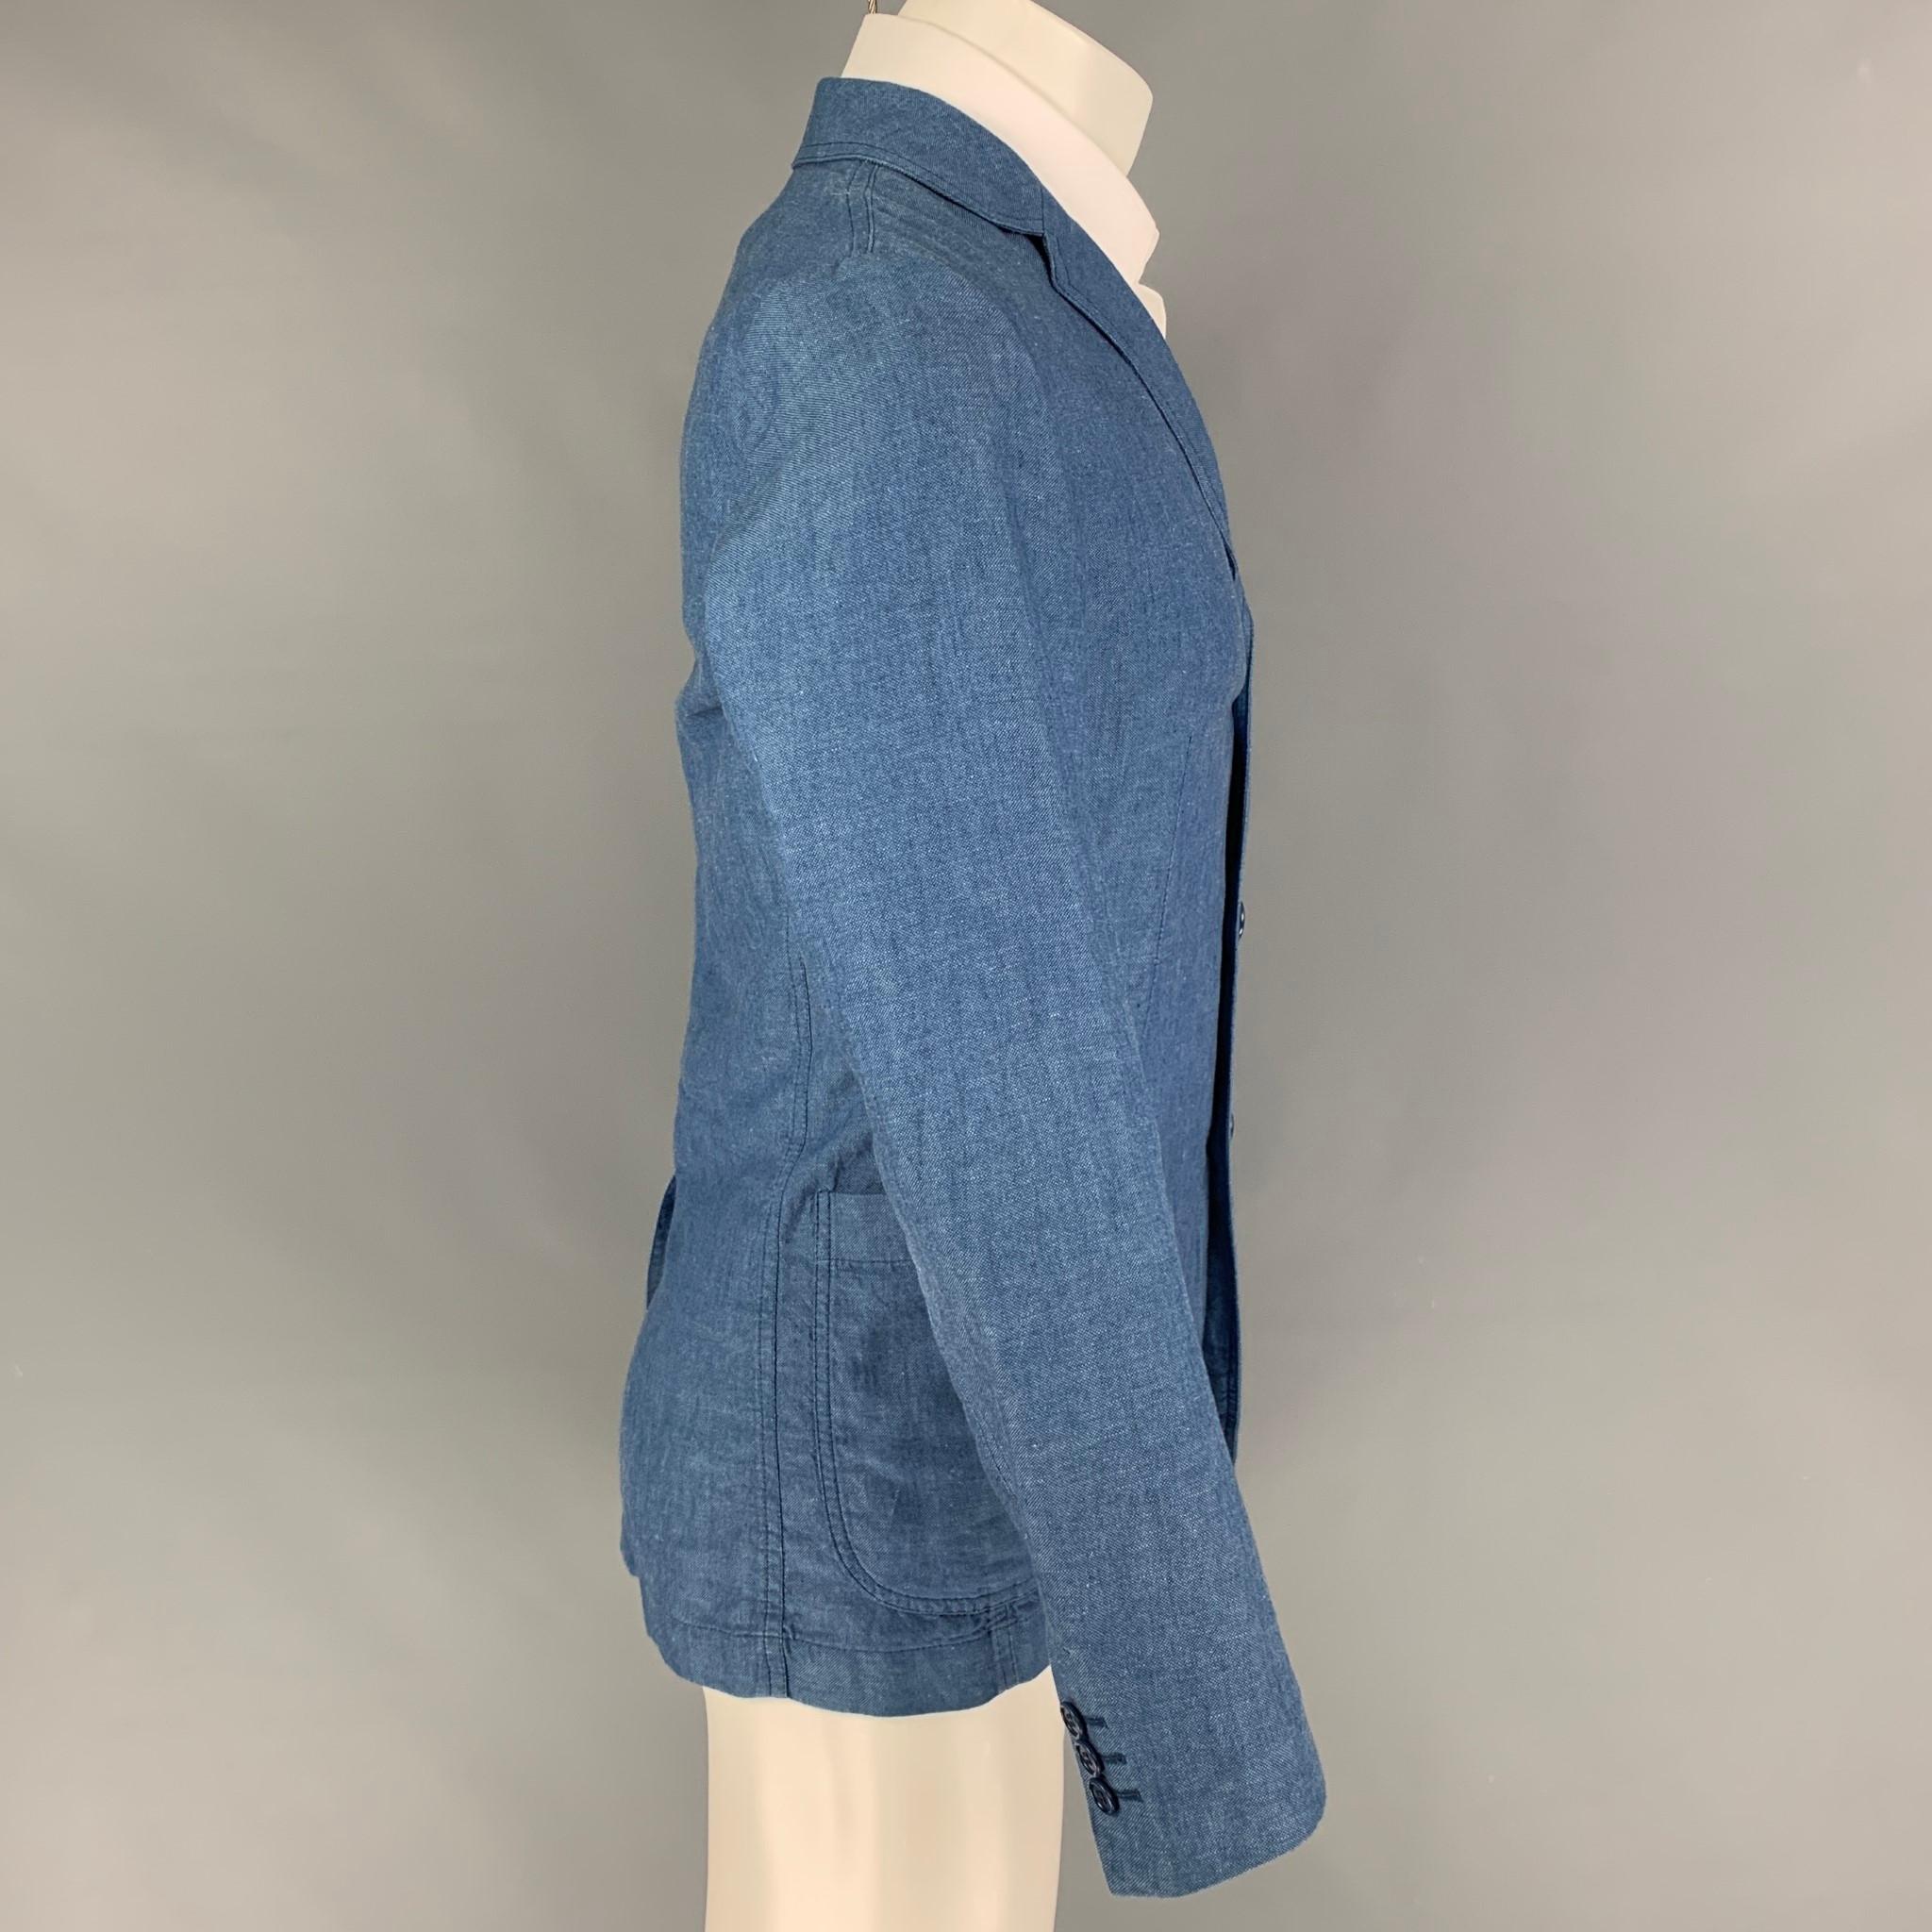 ASPESI sport coat comes in a blue cotton / linen featuring a notch lapel, patch pockets, single back vent, and a three button closure. Made in Italy. 

Very Good Pre-Owned Condition.
Marked: XS
Original Retail Price: